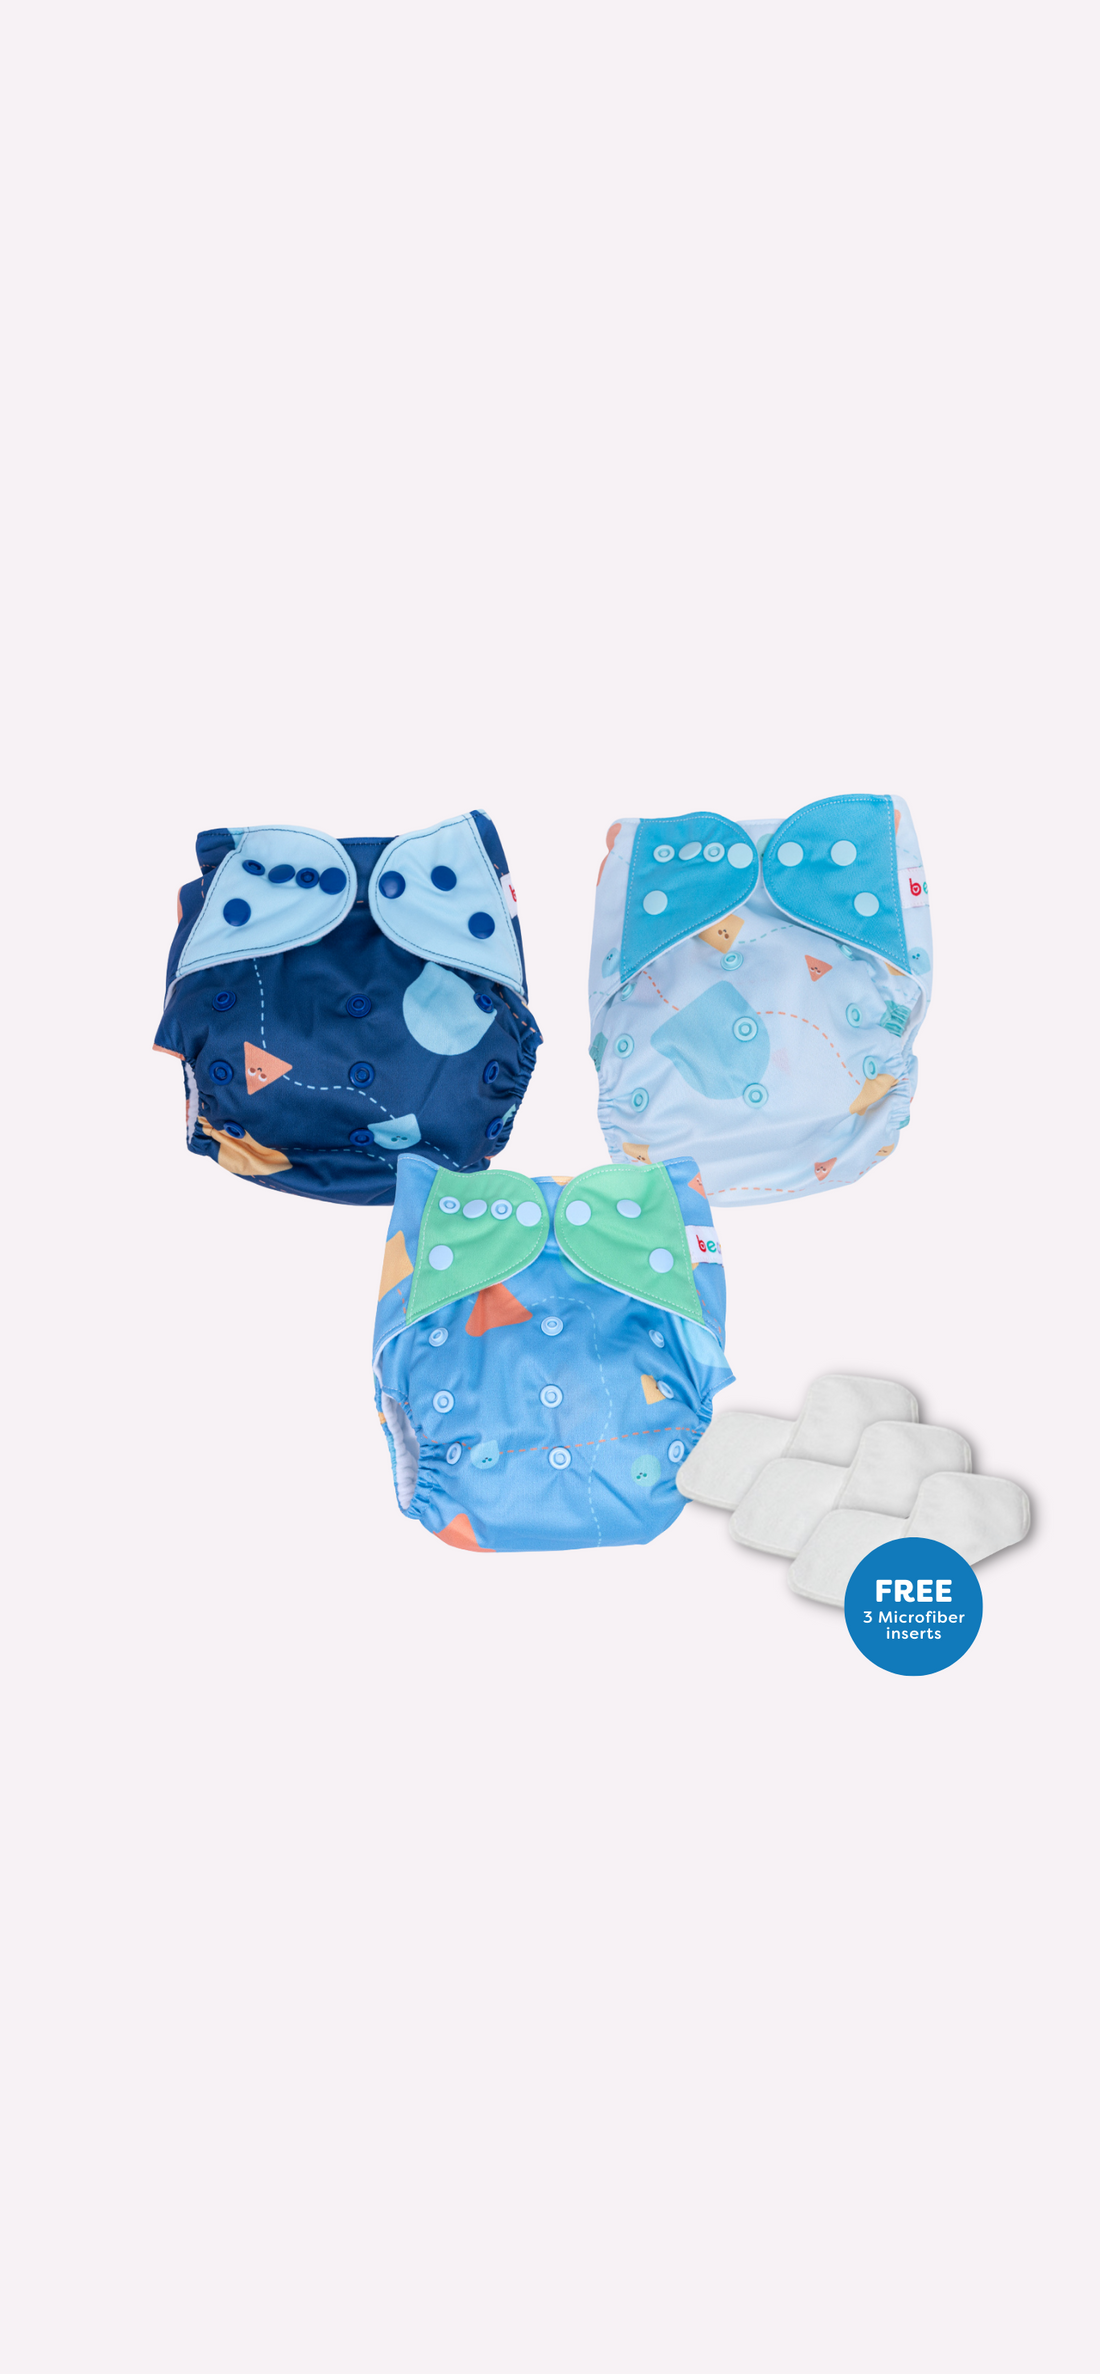 Snappies Little Bean Boys Pattern Cloth Diaper Set of 3